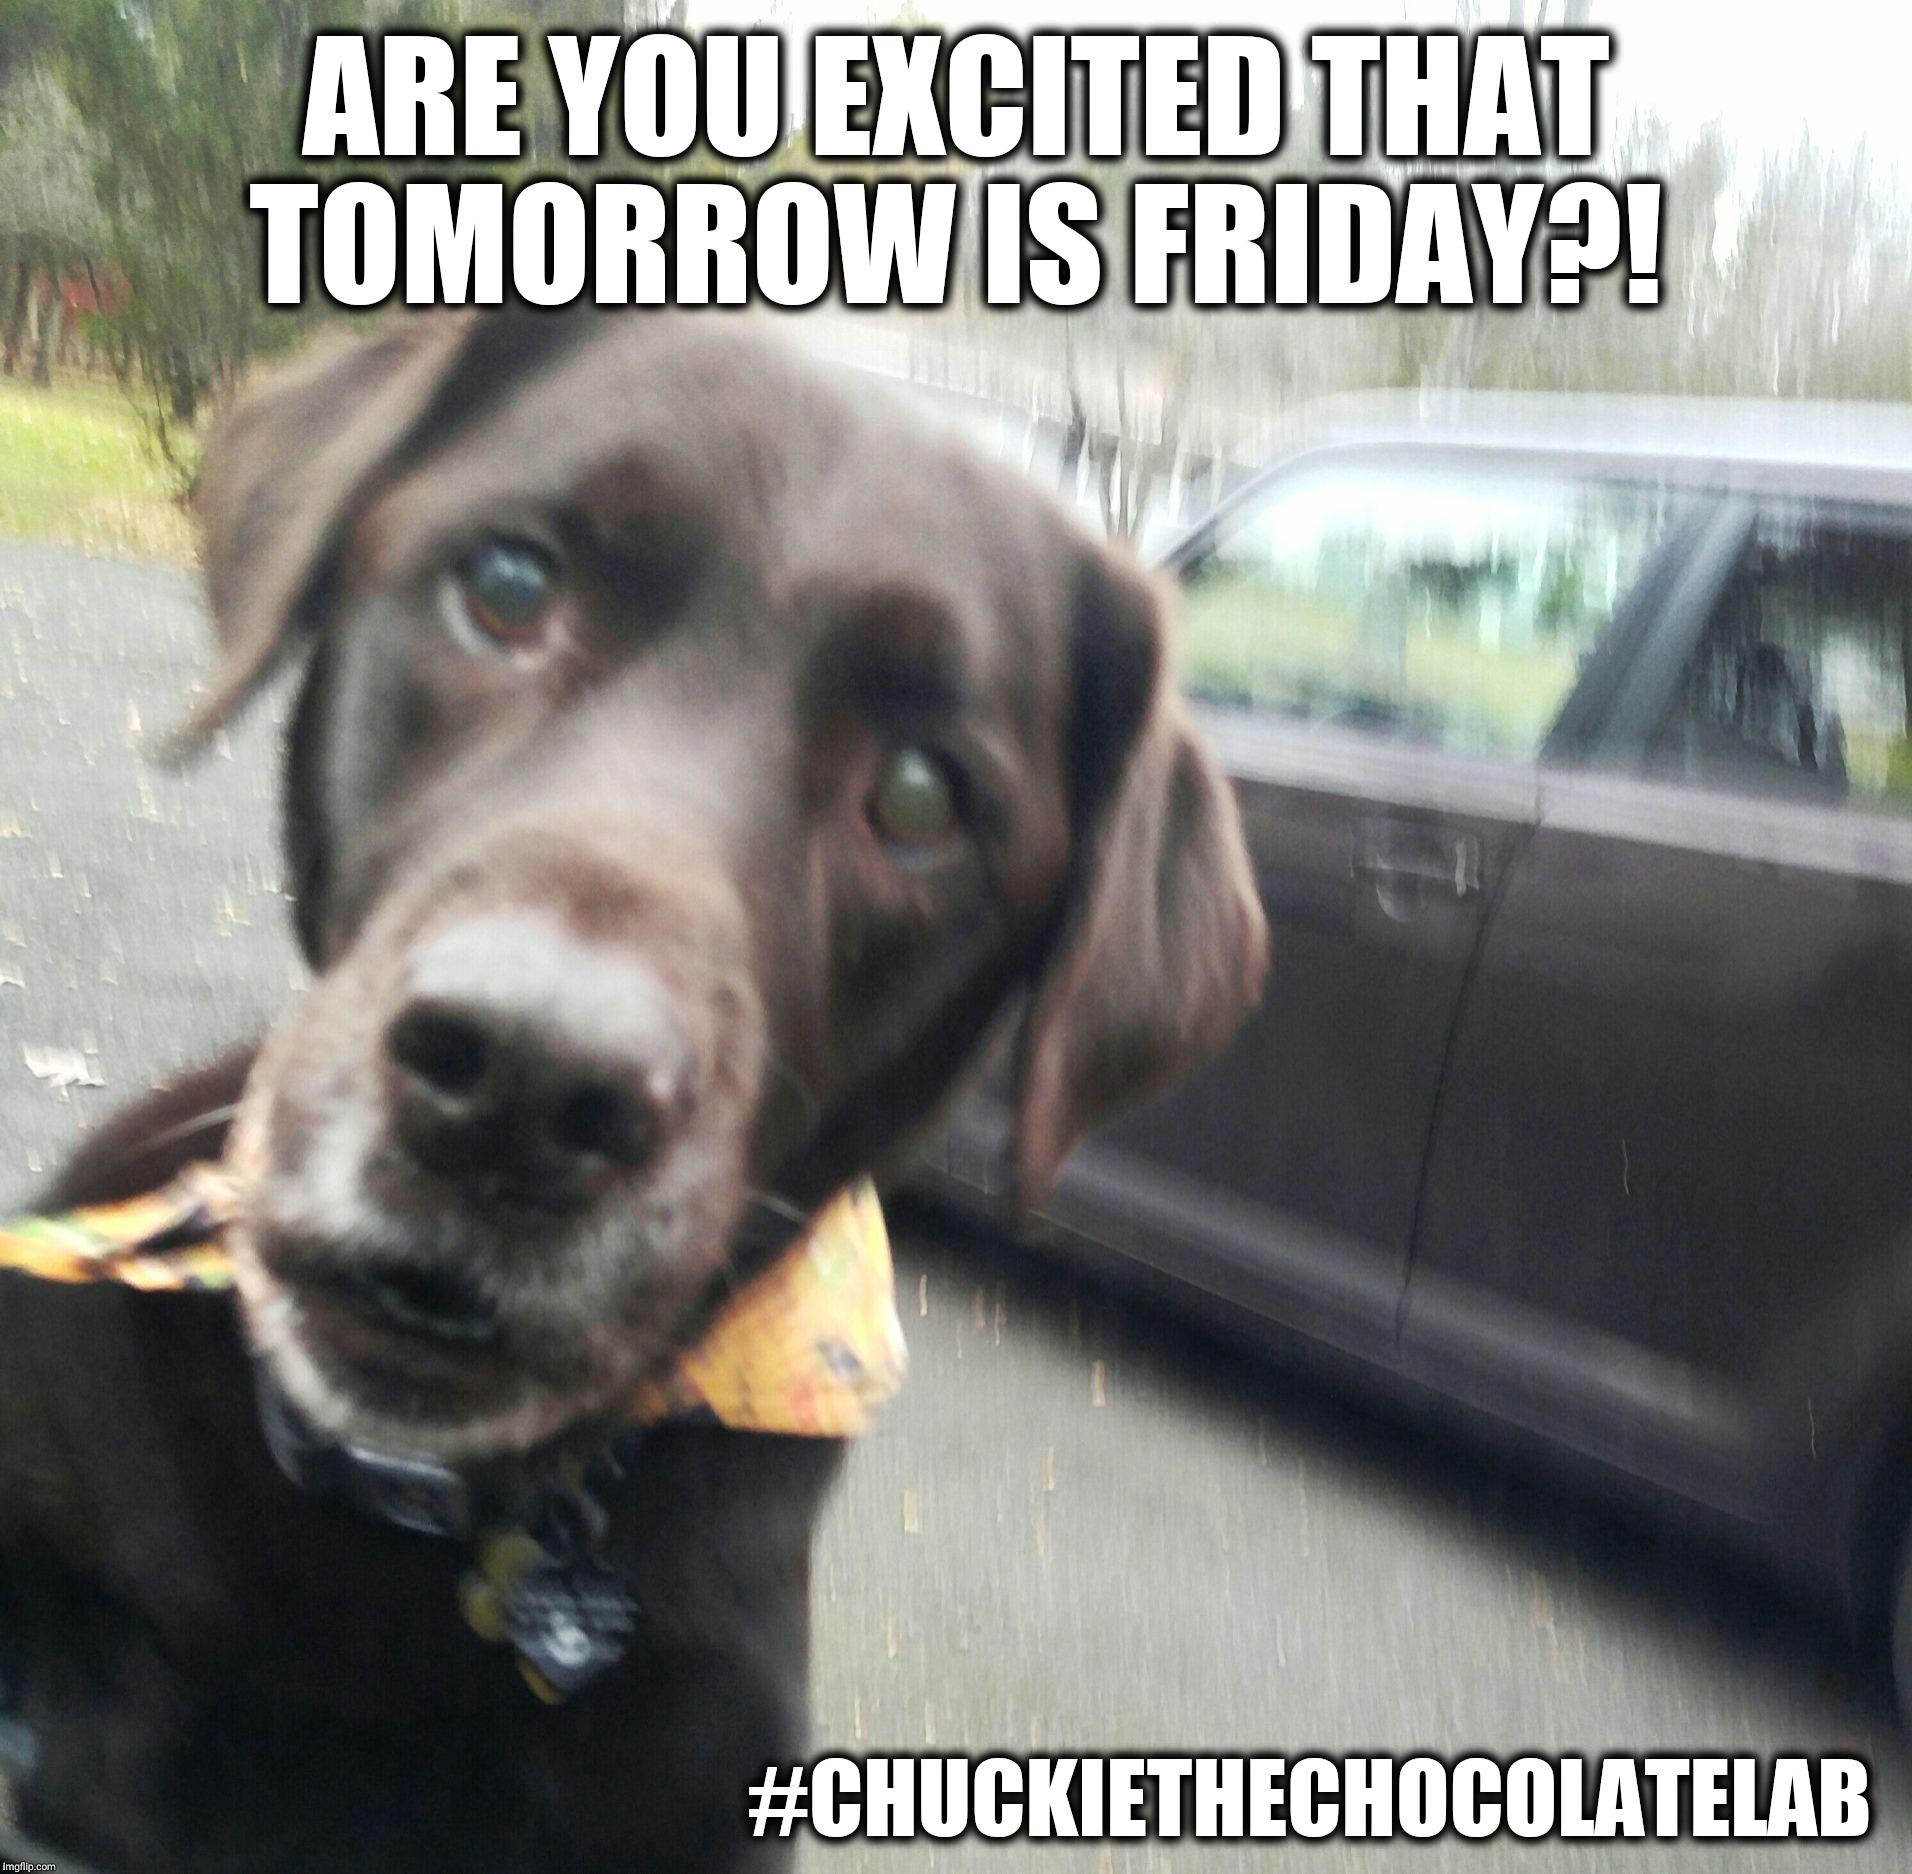 Tomorrow is Friday  | ARE YOU EXCITED THAT TOMORROW IS FRIDAY?! #CHUCKIETHECHOCOLATELAB | image tagged in chuckie the chocolate lab teamchuckie,friday,memes,dogs,cute,pets | made w/ Imgflip meme maker